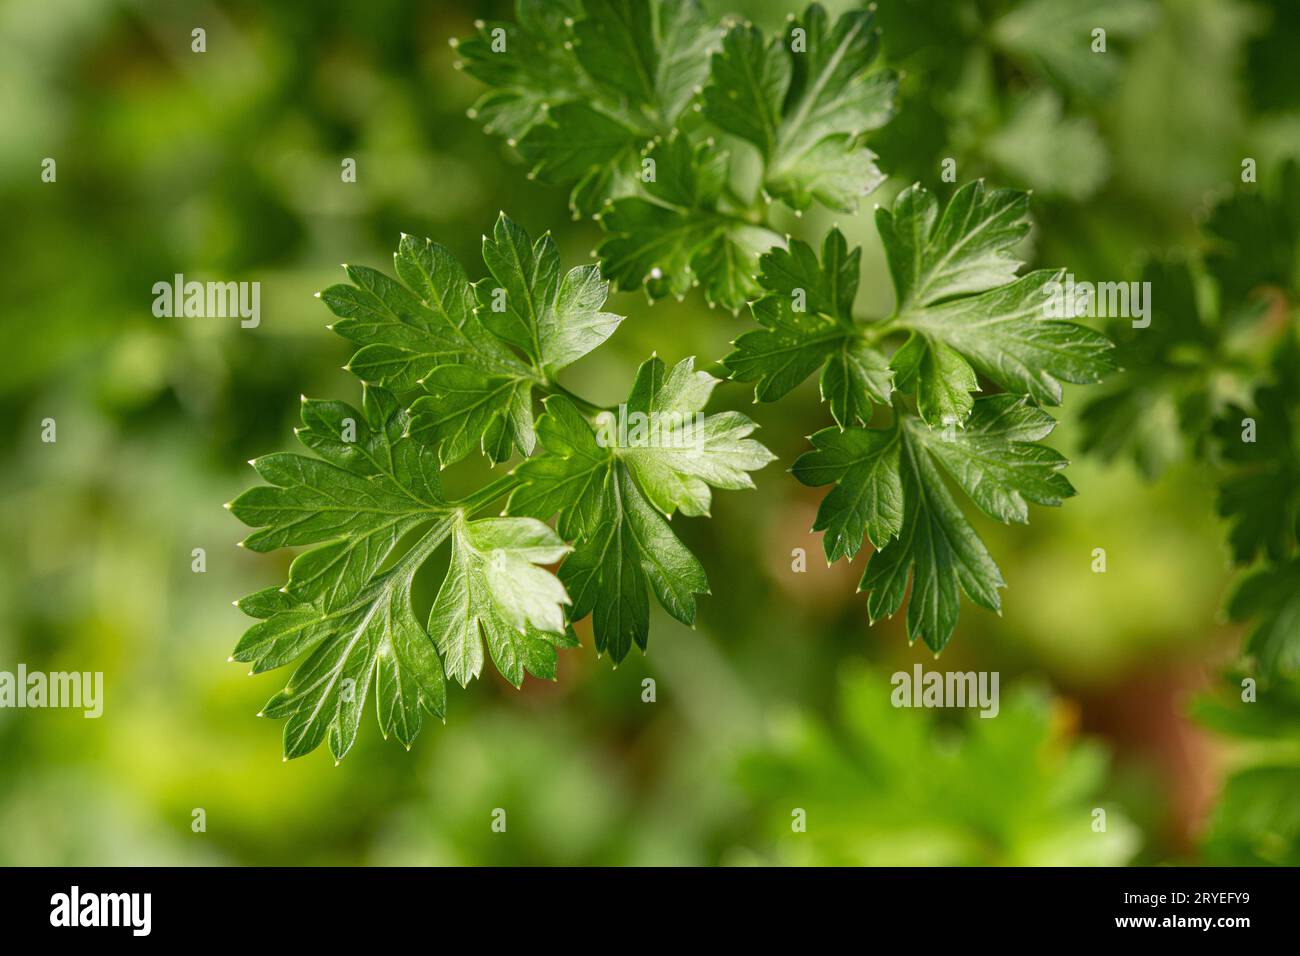 Parsley plant on outdoor Stock Photo